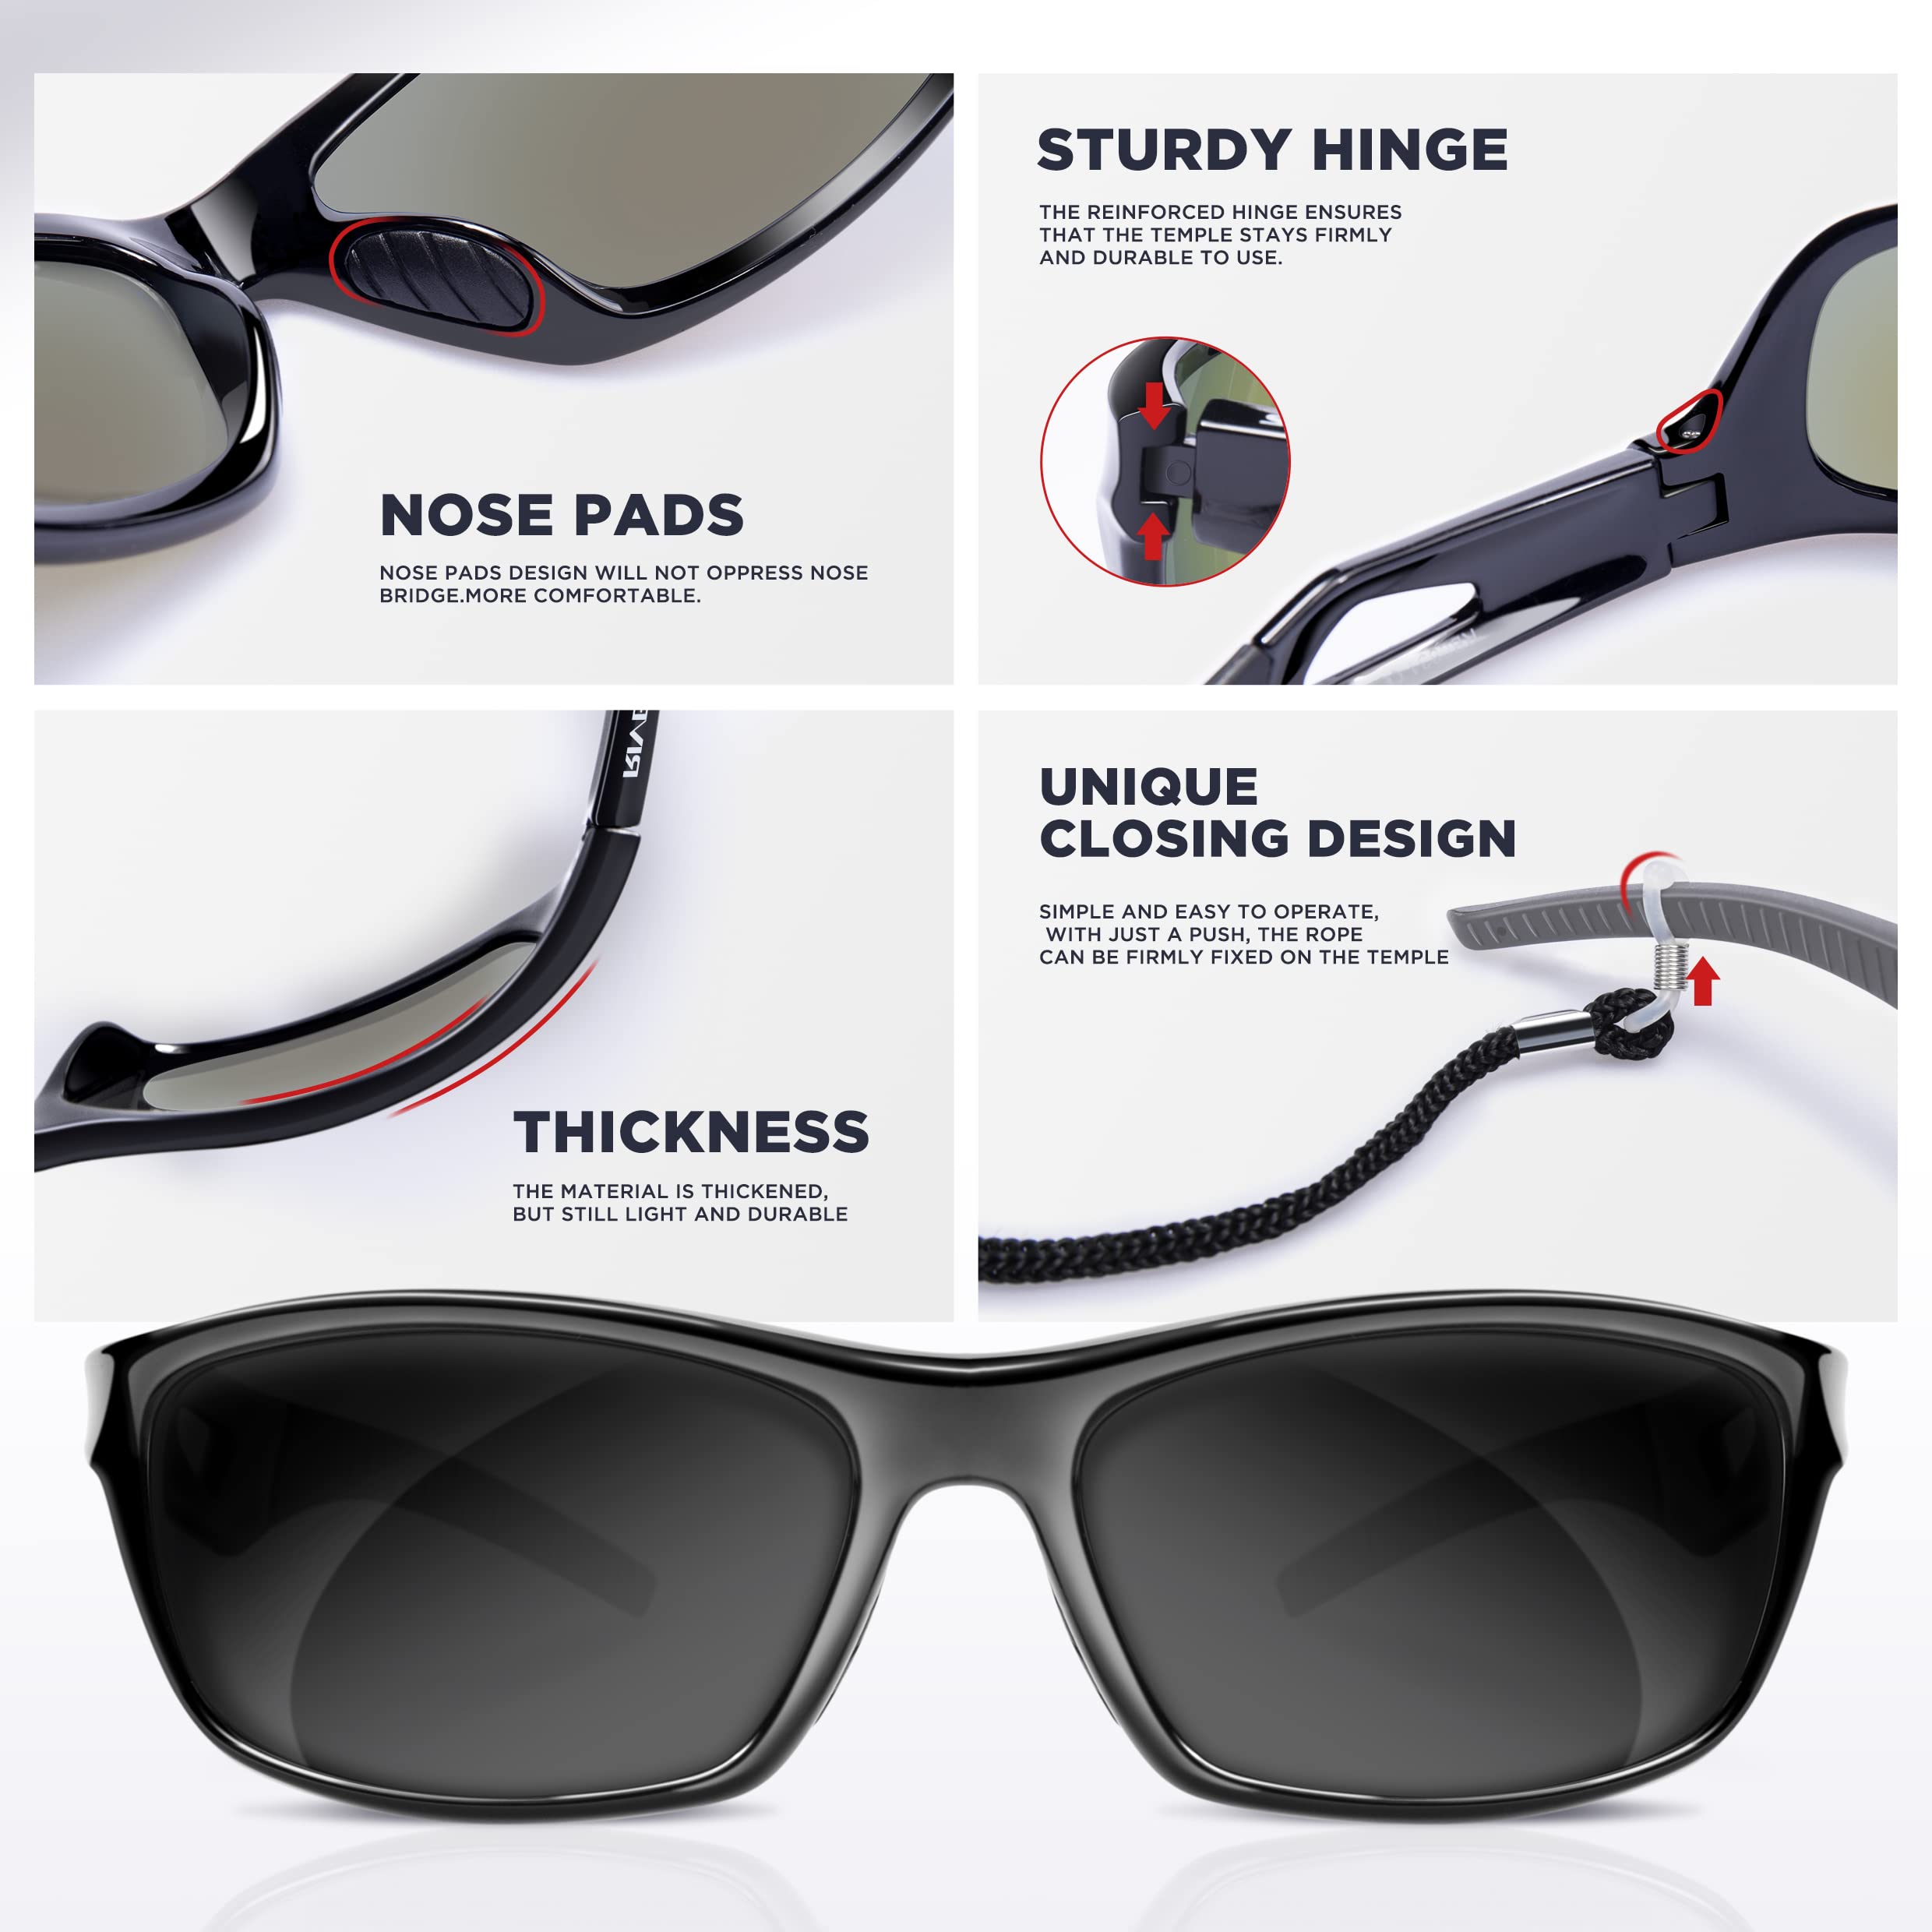 RIVBOS Polarized Sports Sunglasses Driving shades For Men TR90 Unbreakable Frame RB831